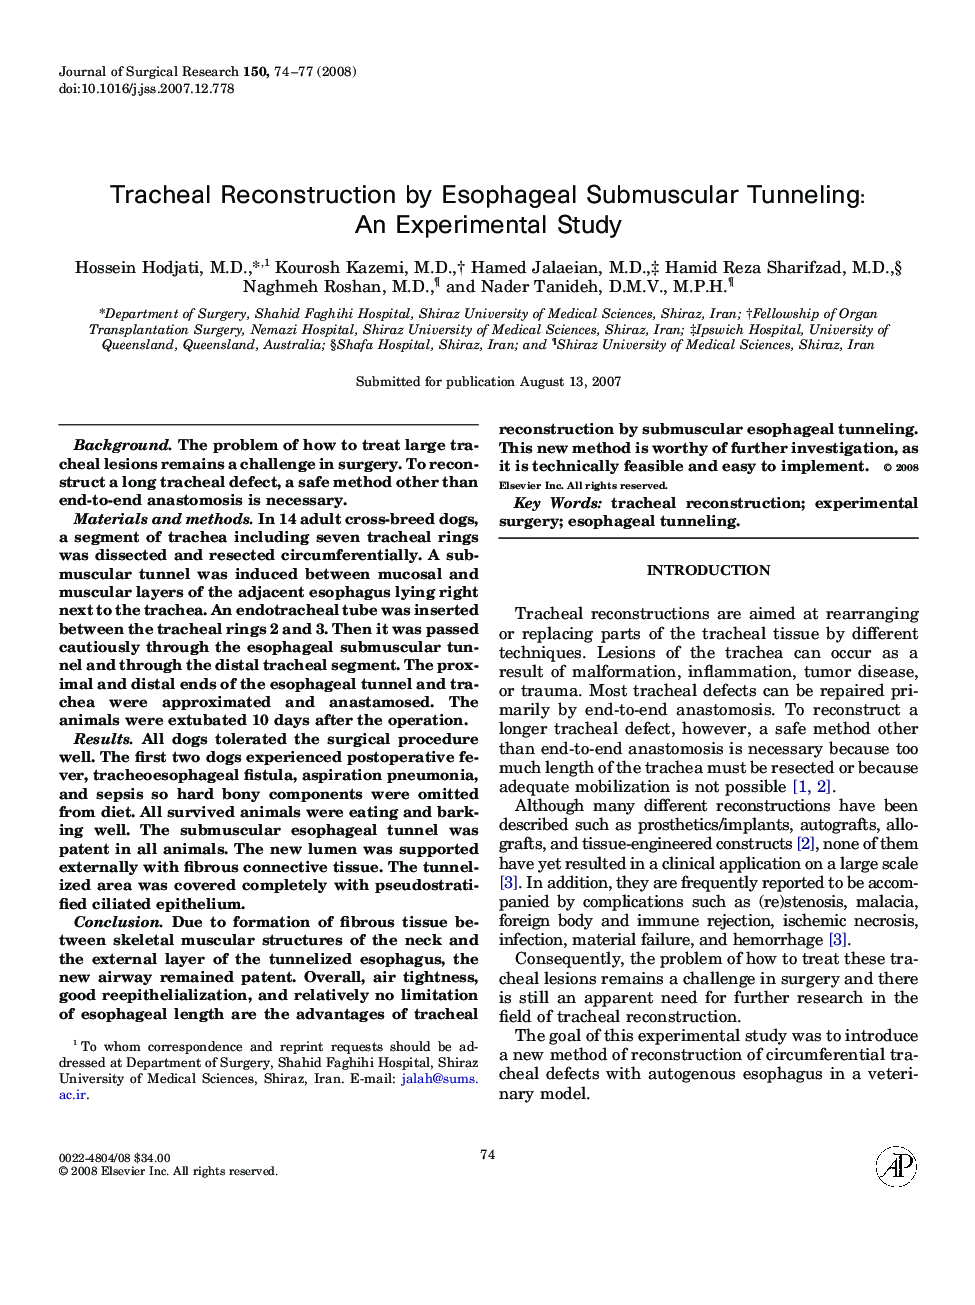 Tracheal Reconstruction by Esophageal Submuscular Tunneling: An Experimental Study